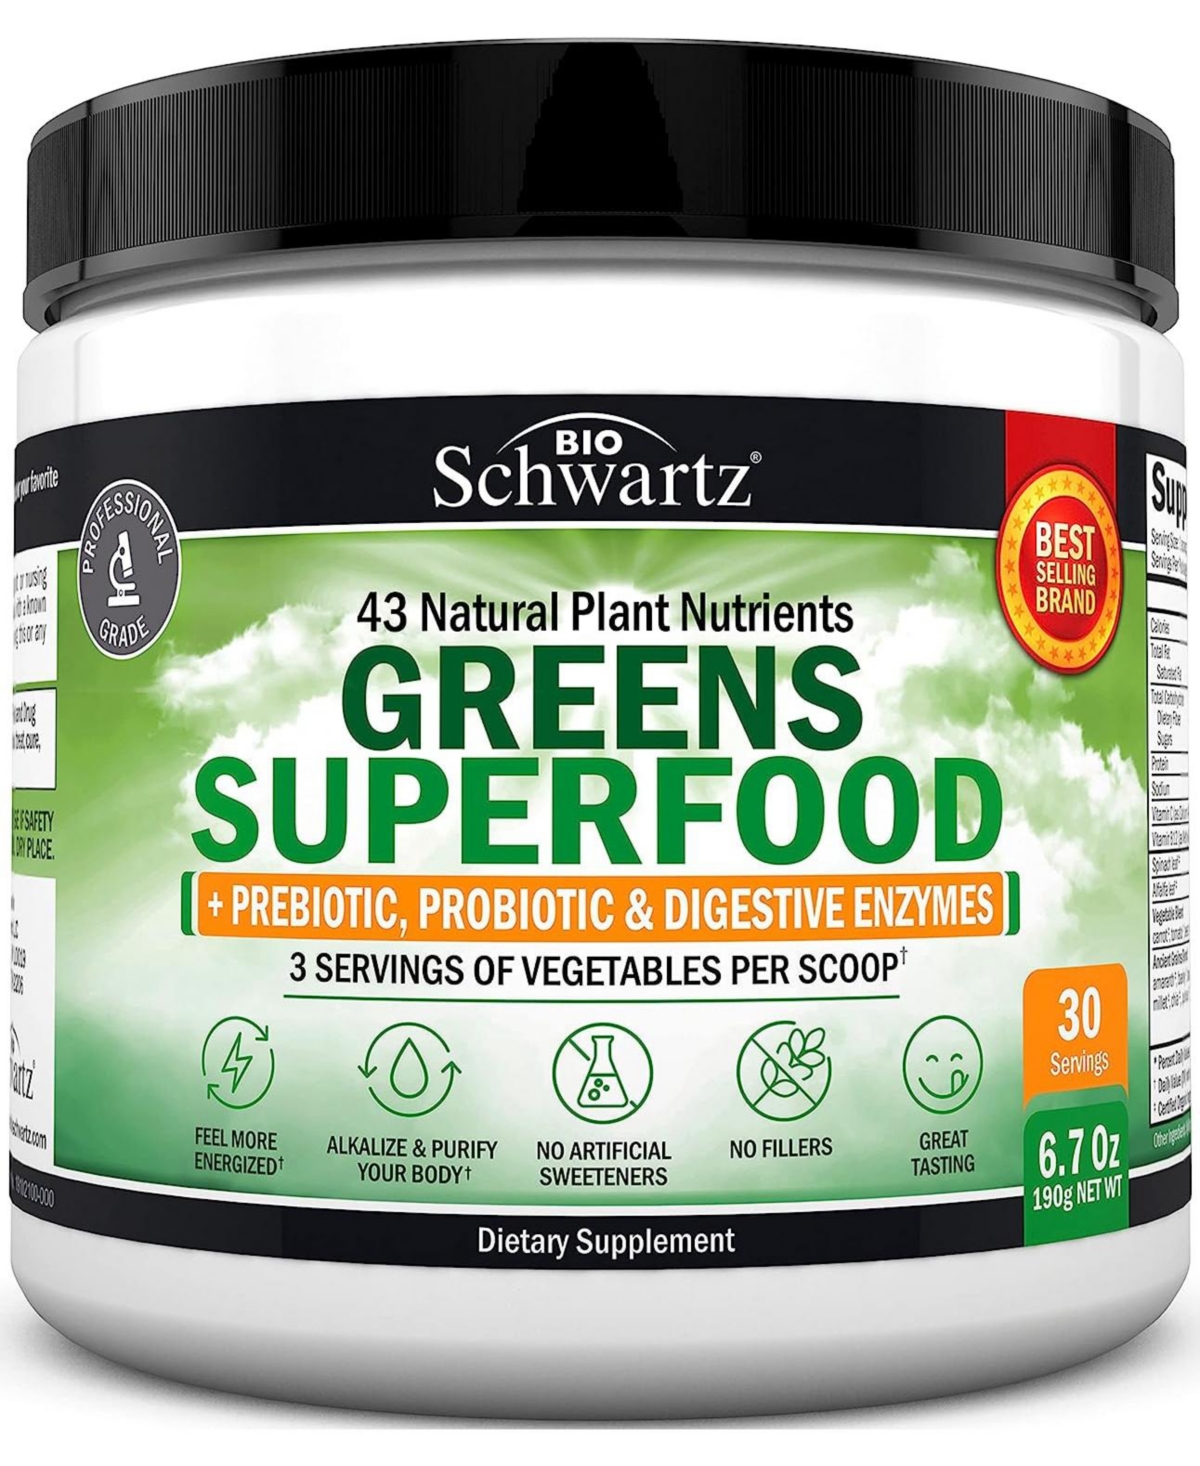 Super Greens Superfood Powder - Greens Powder with Probiotics Prebiotics Digestive Enzymes and 43 Green Superfoods - Chlorophyll Bilberry